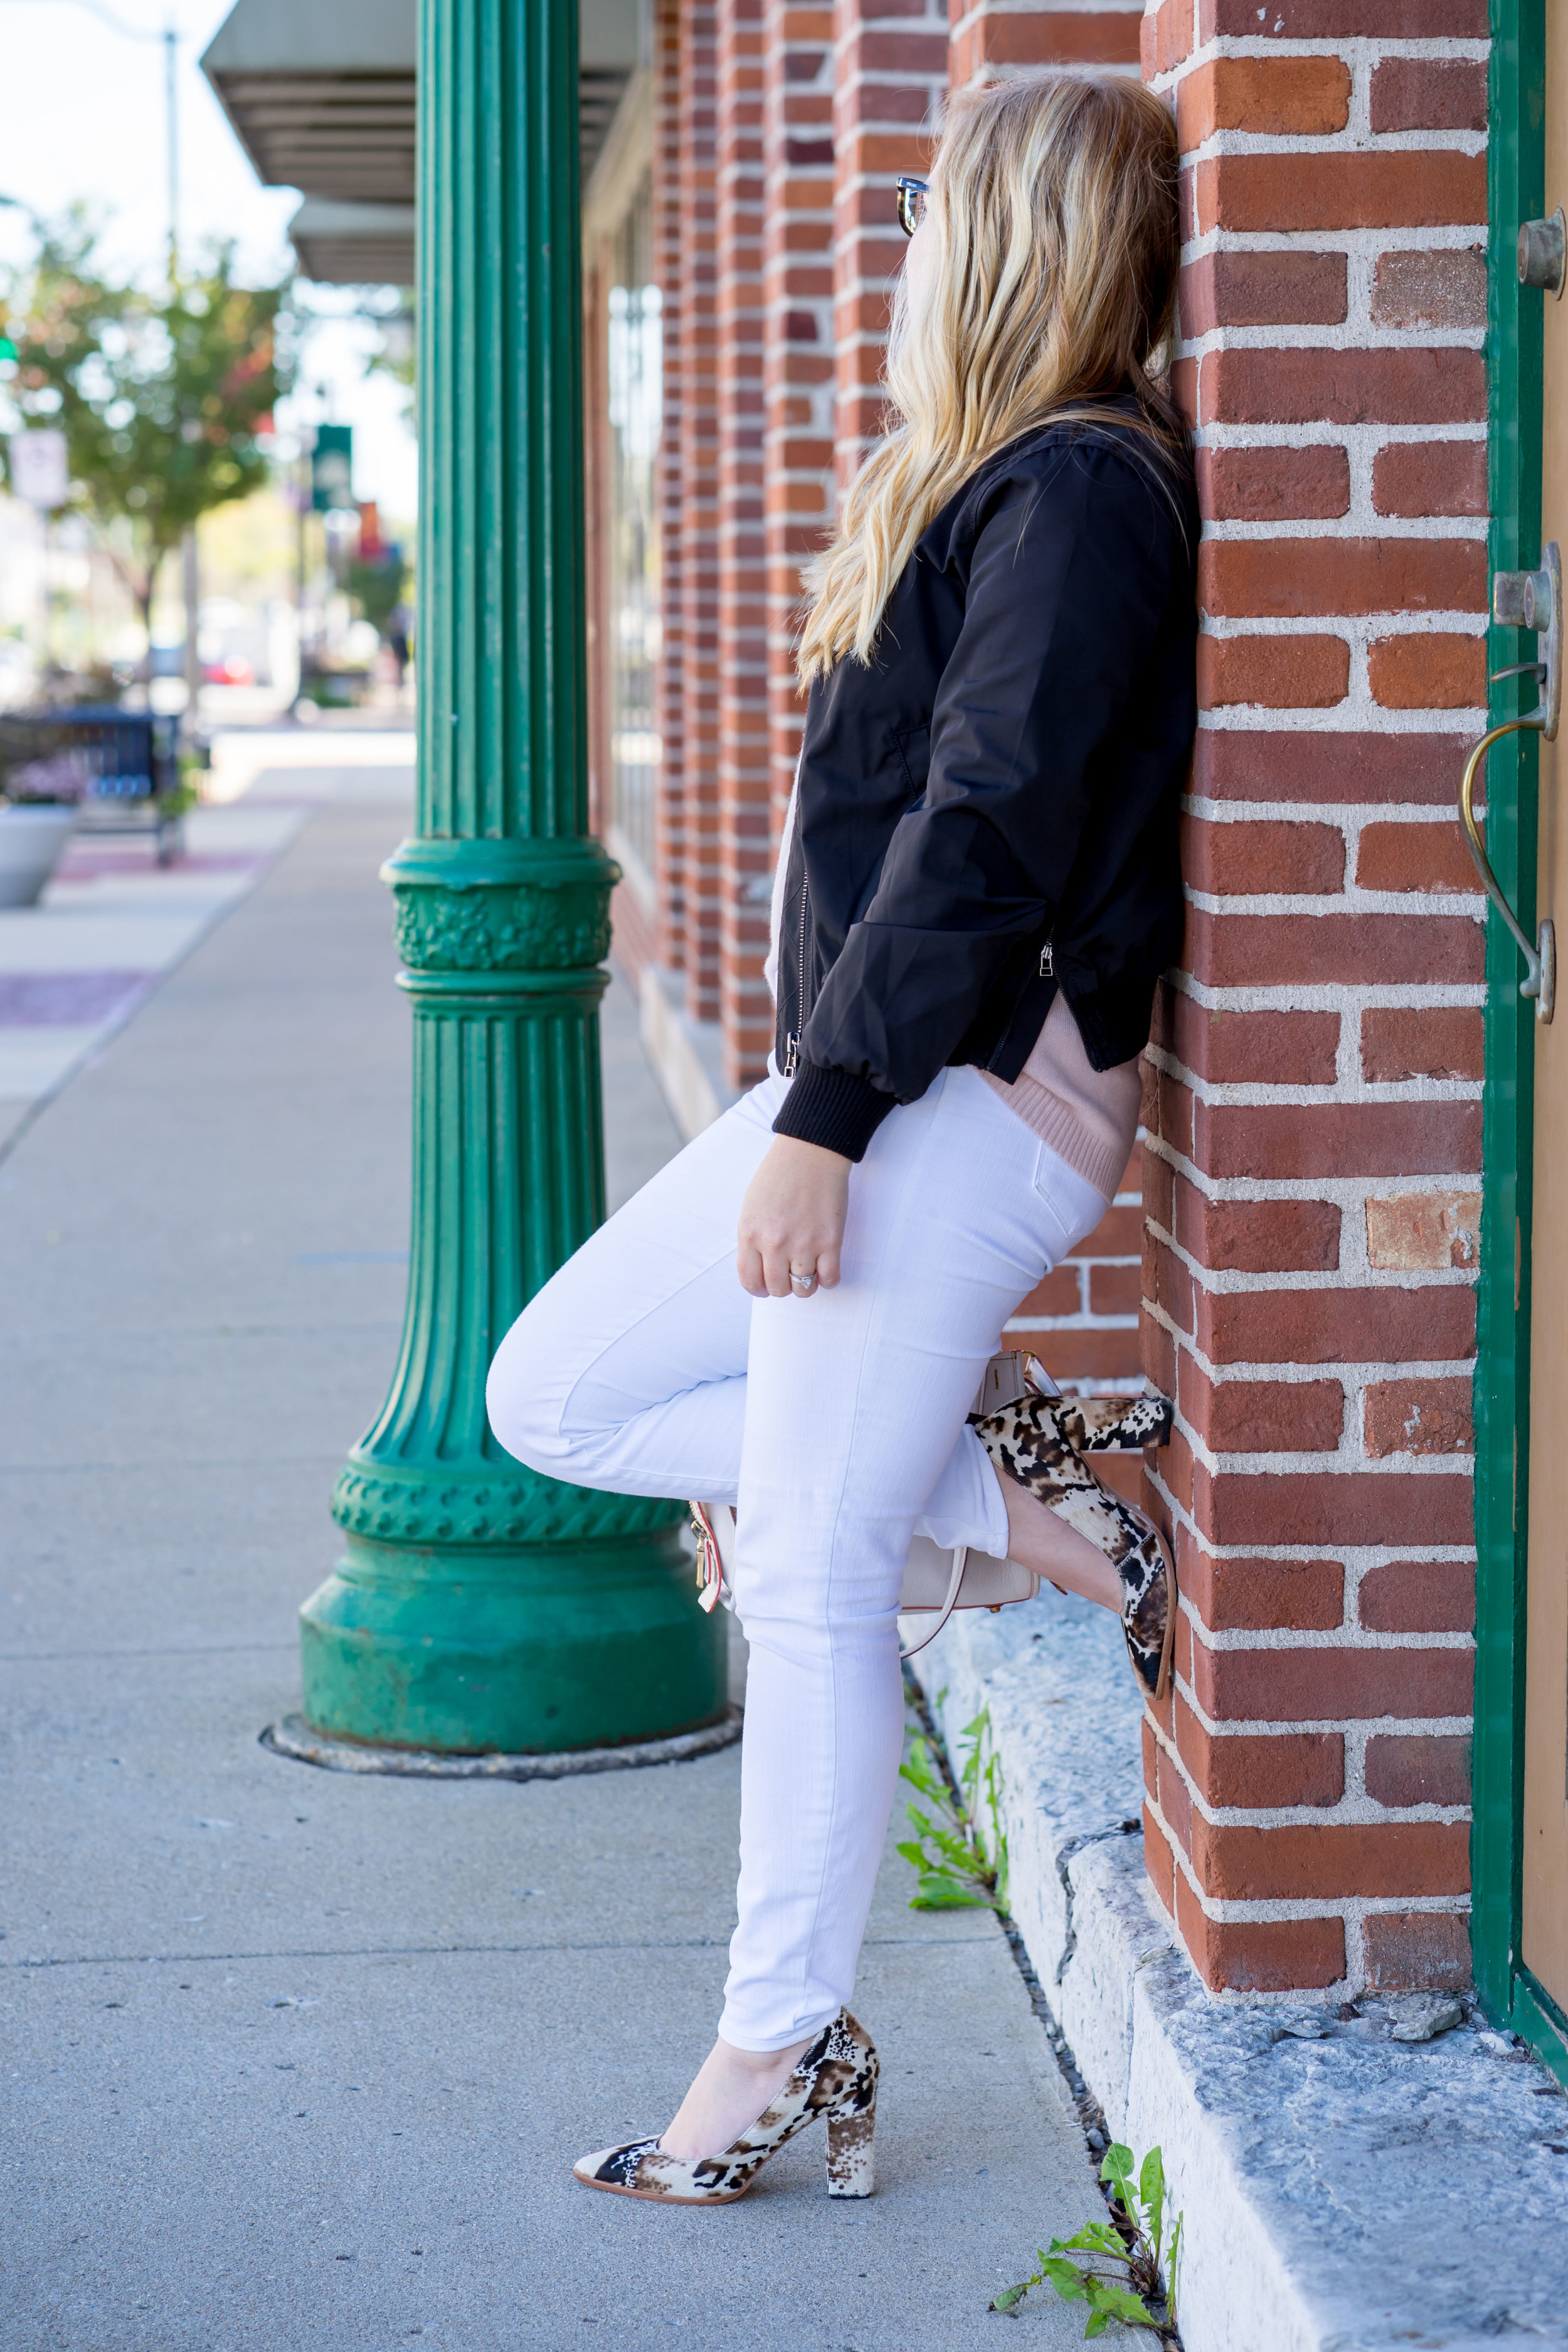 Maggie a la Mode - Madewell Side-Zip Bomber Jacket, Equipment Bryce Cashmere Sweater, J Brand High Rise Alana Crop White Jeans, Loeffler Randall Remy Phython Block Heels, Coach Rogue 25